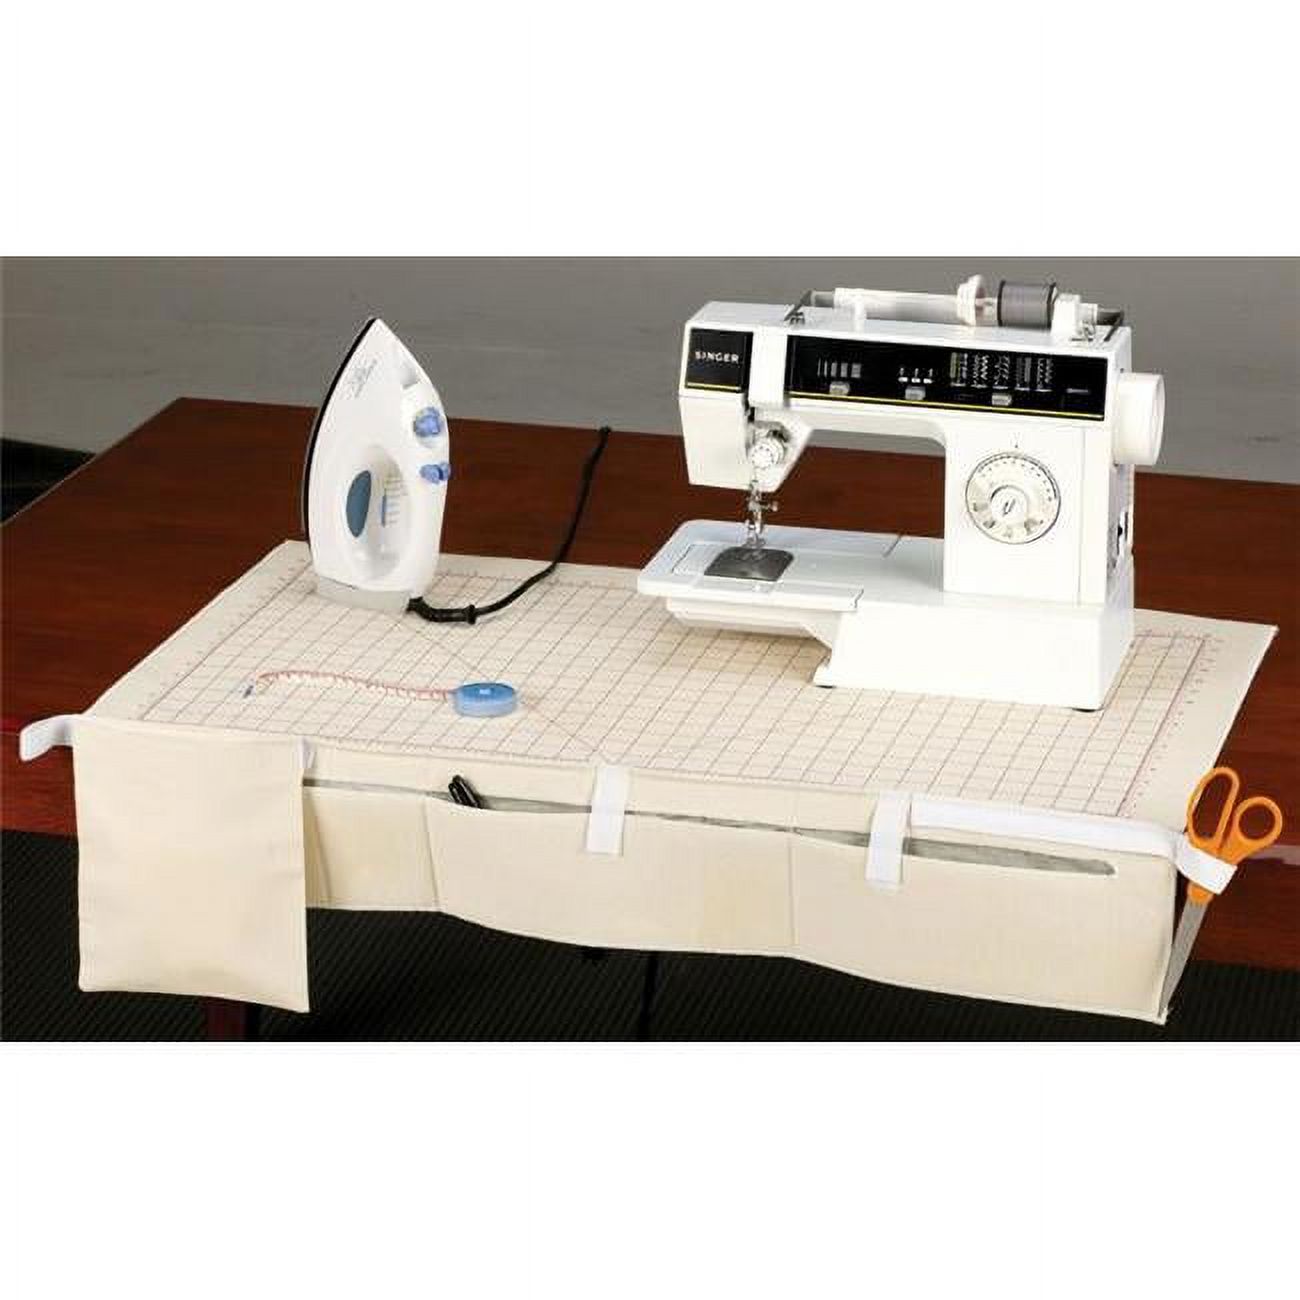 Household Essentials Sewing Center - image 1 of 3